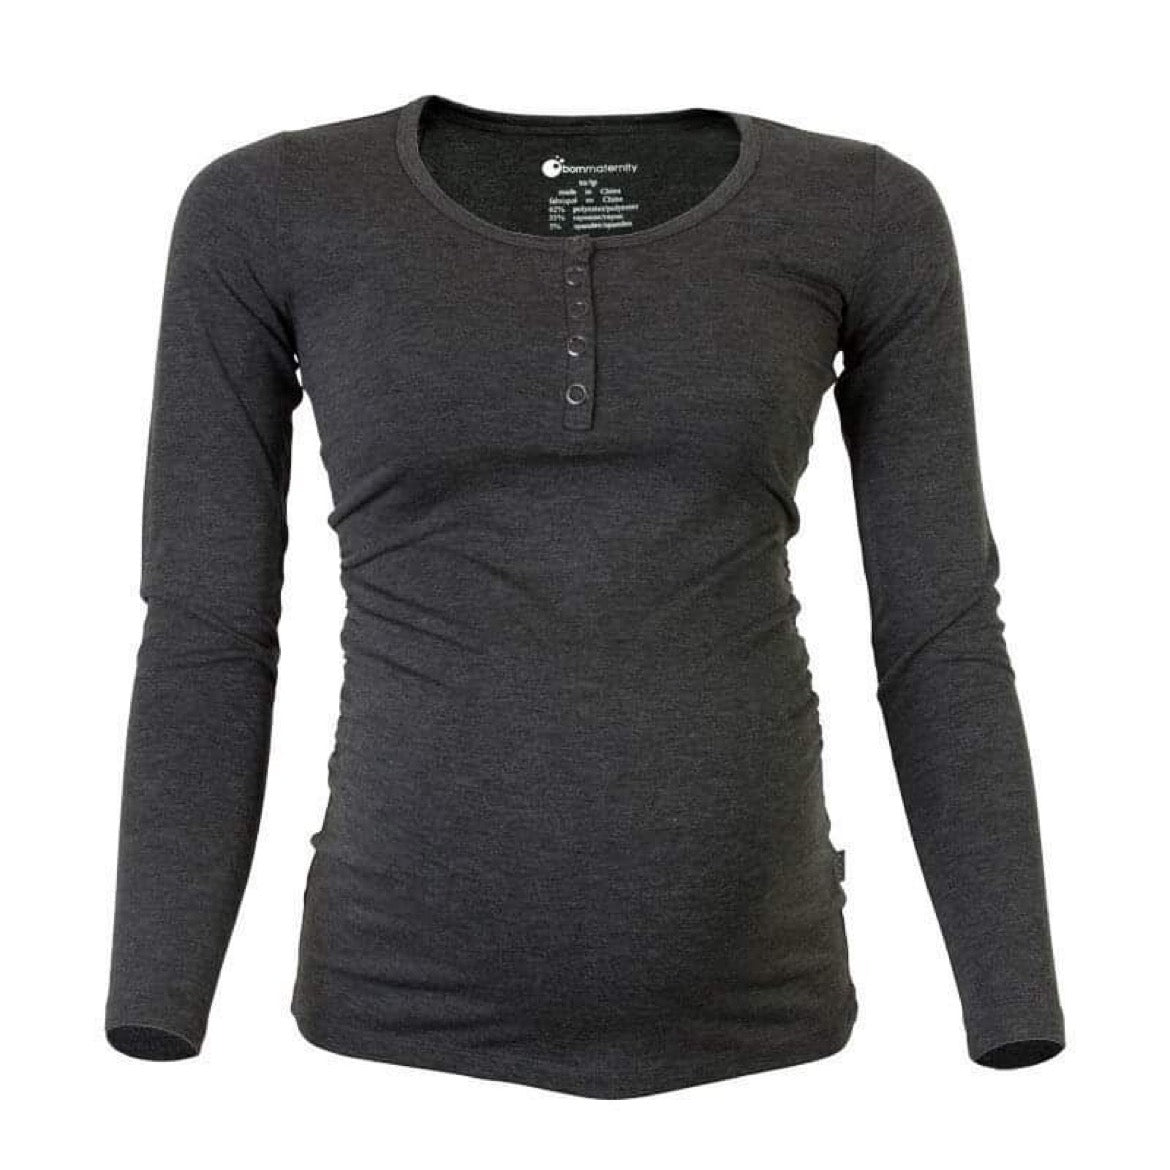 Born Maternity Casual Comfy Affordable Quality Long Sleeve Feeding Top Grey